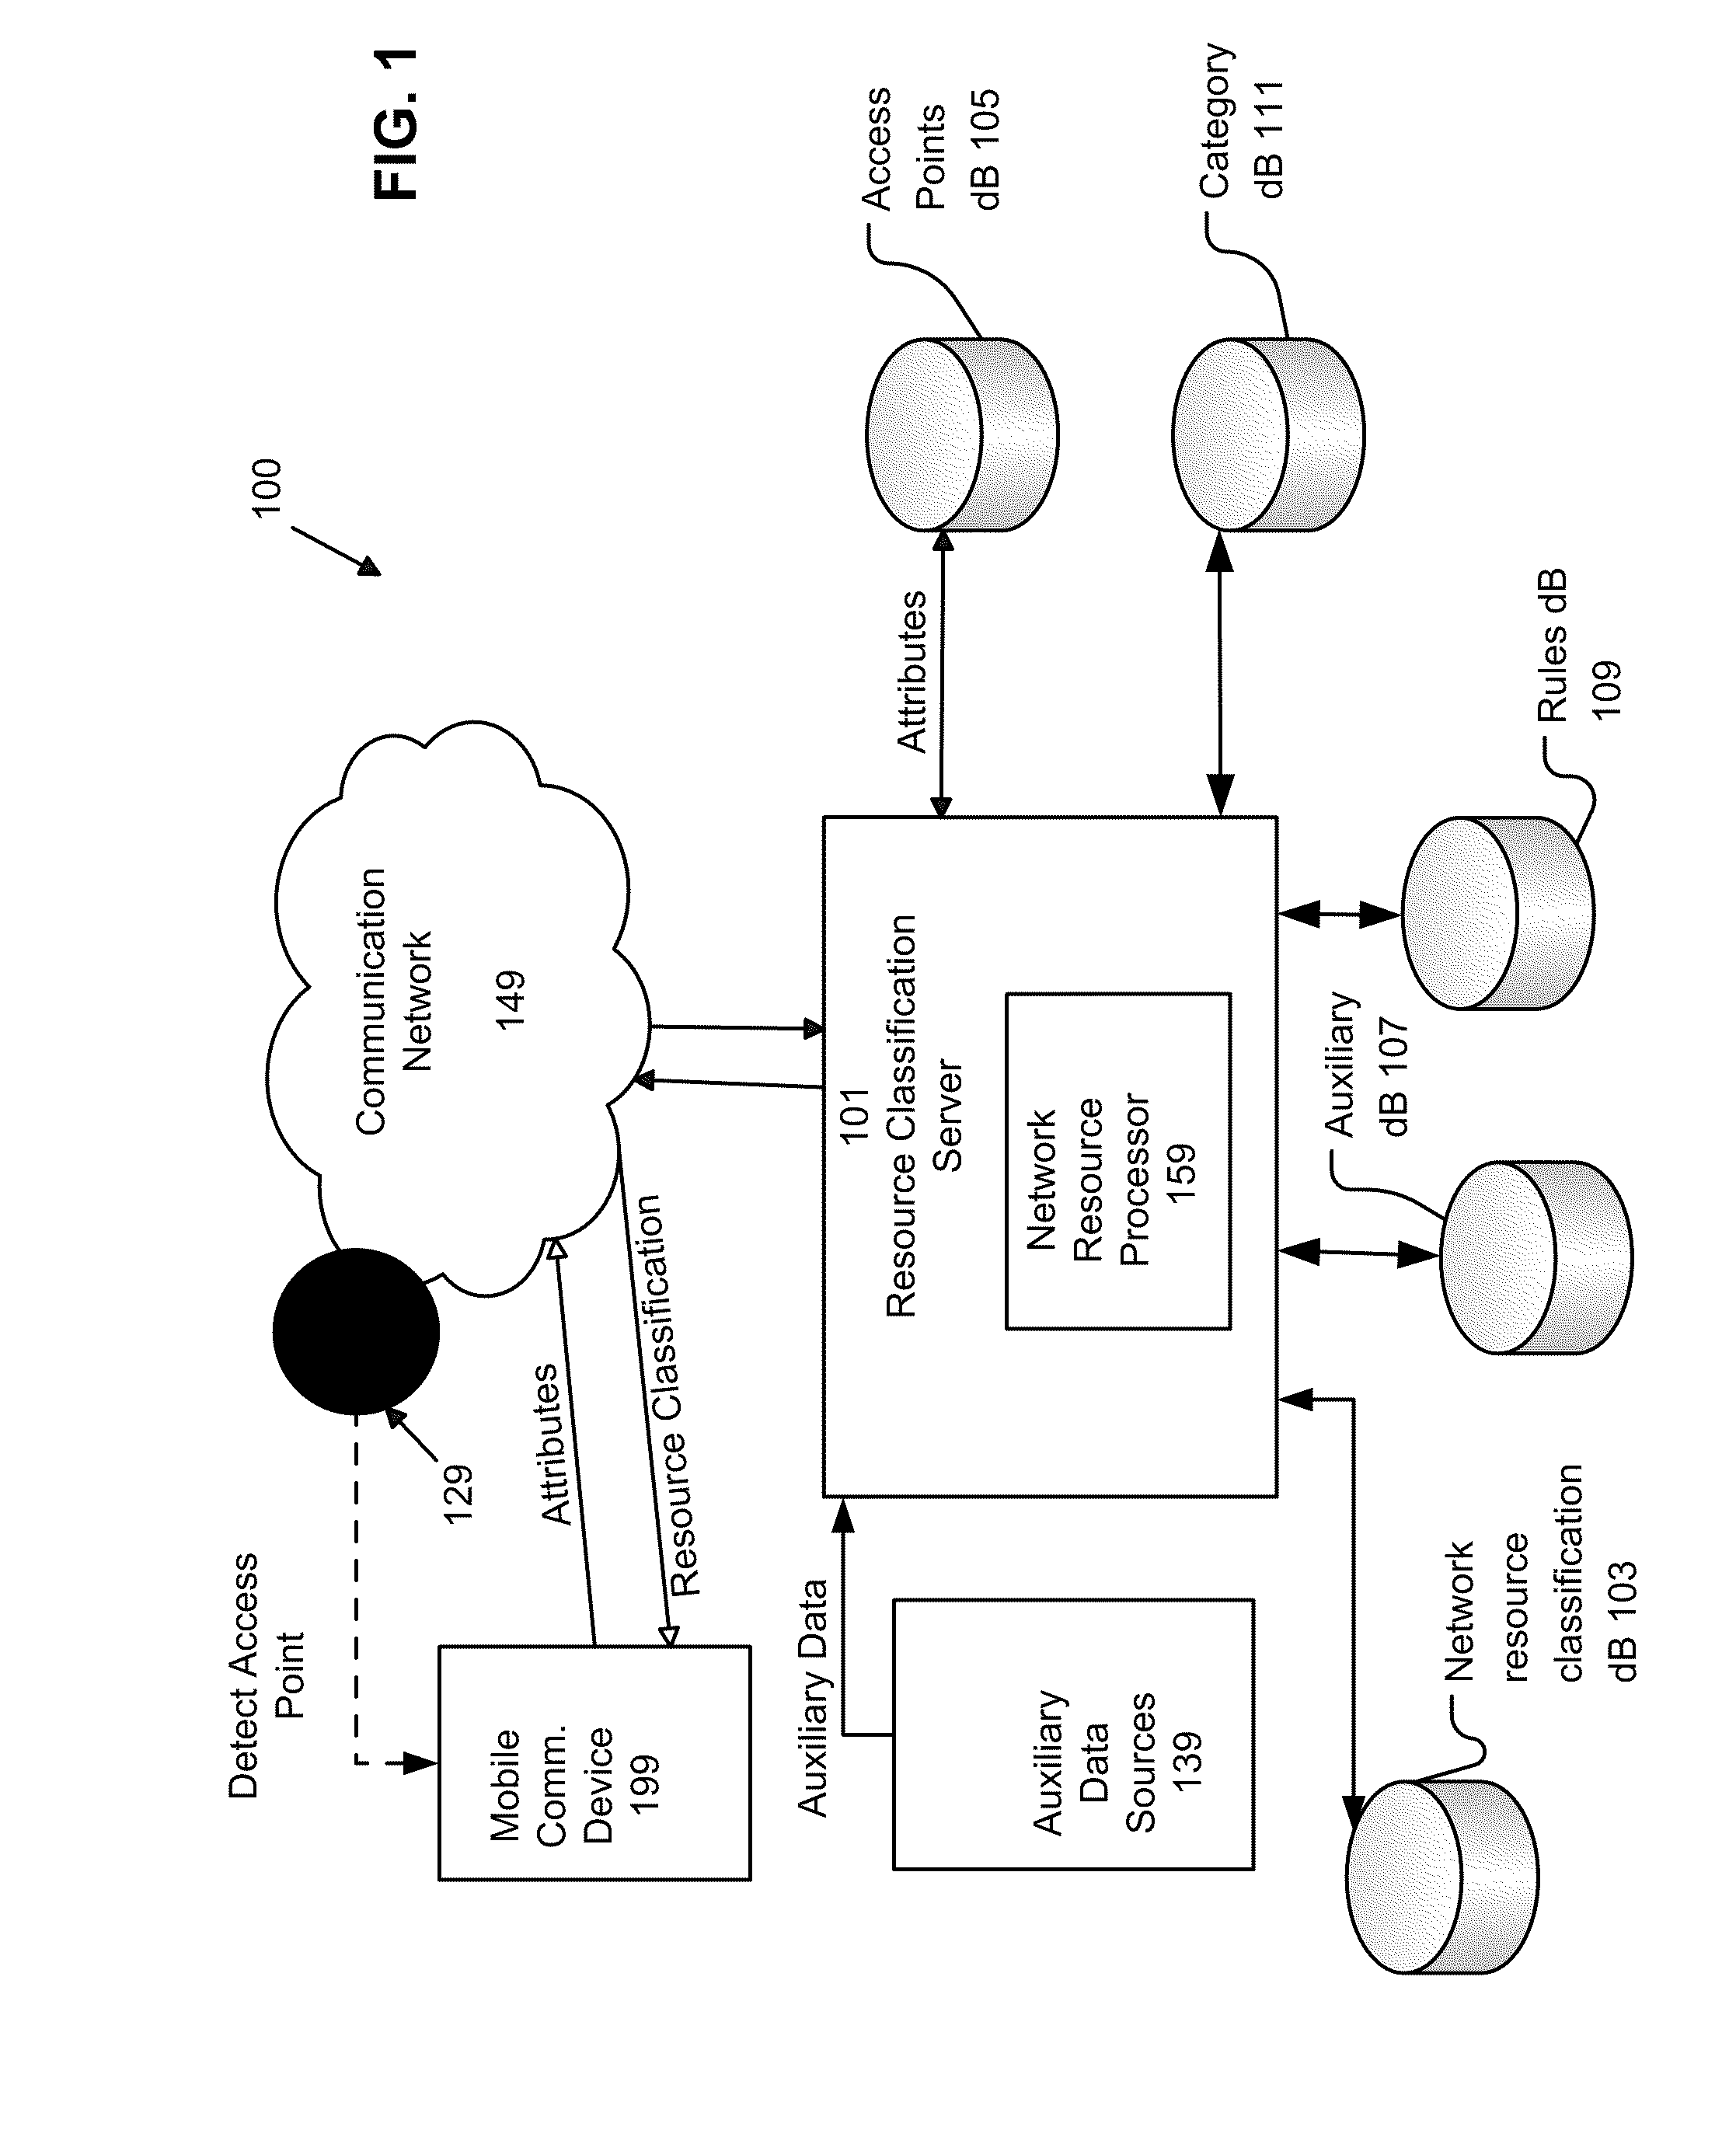 System and Method of Automatically Connecting a Mobile Communication Device to A Network Using a Communications Resource Database